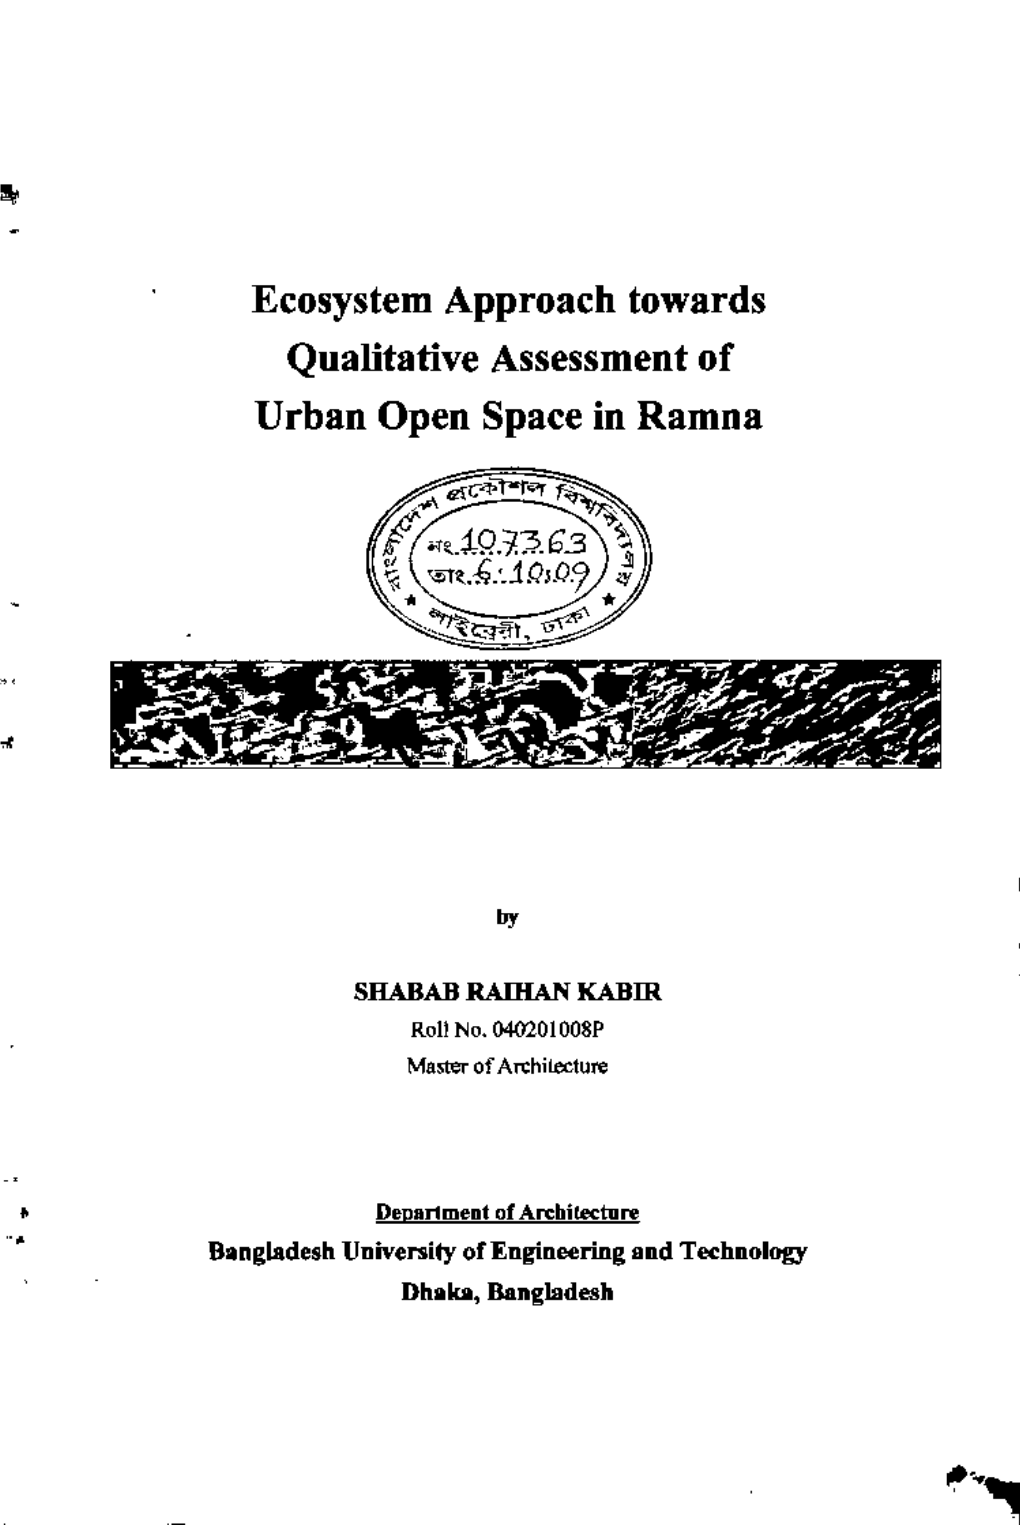 Ecosystem Approach Towards Qualitative Assessment of Urban Open Space in Ramna